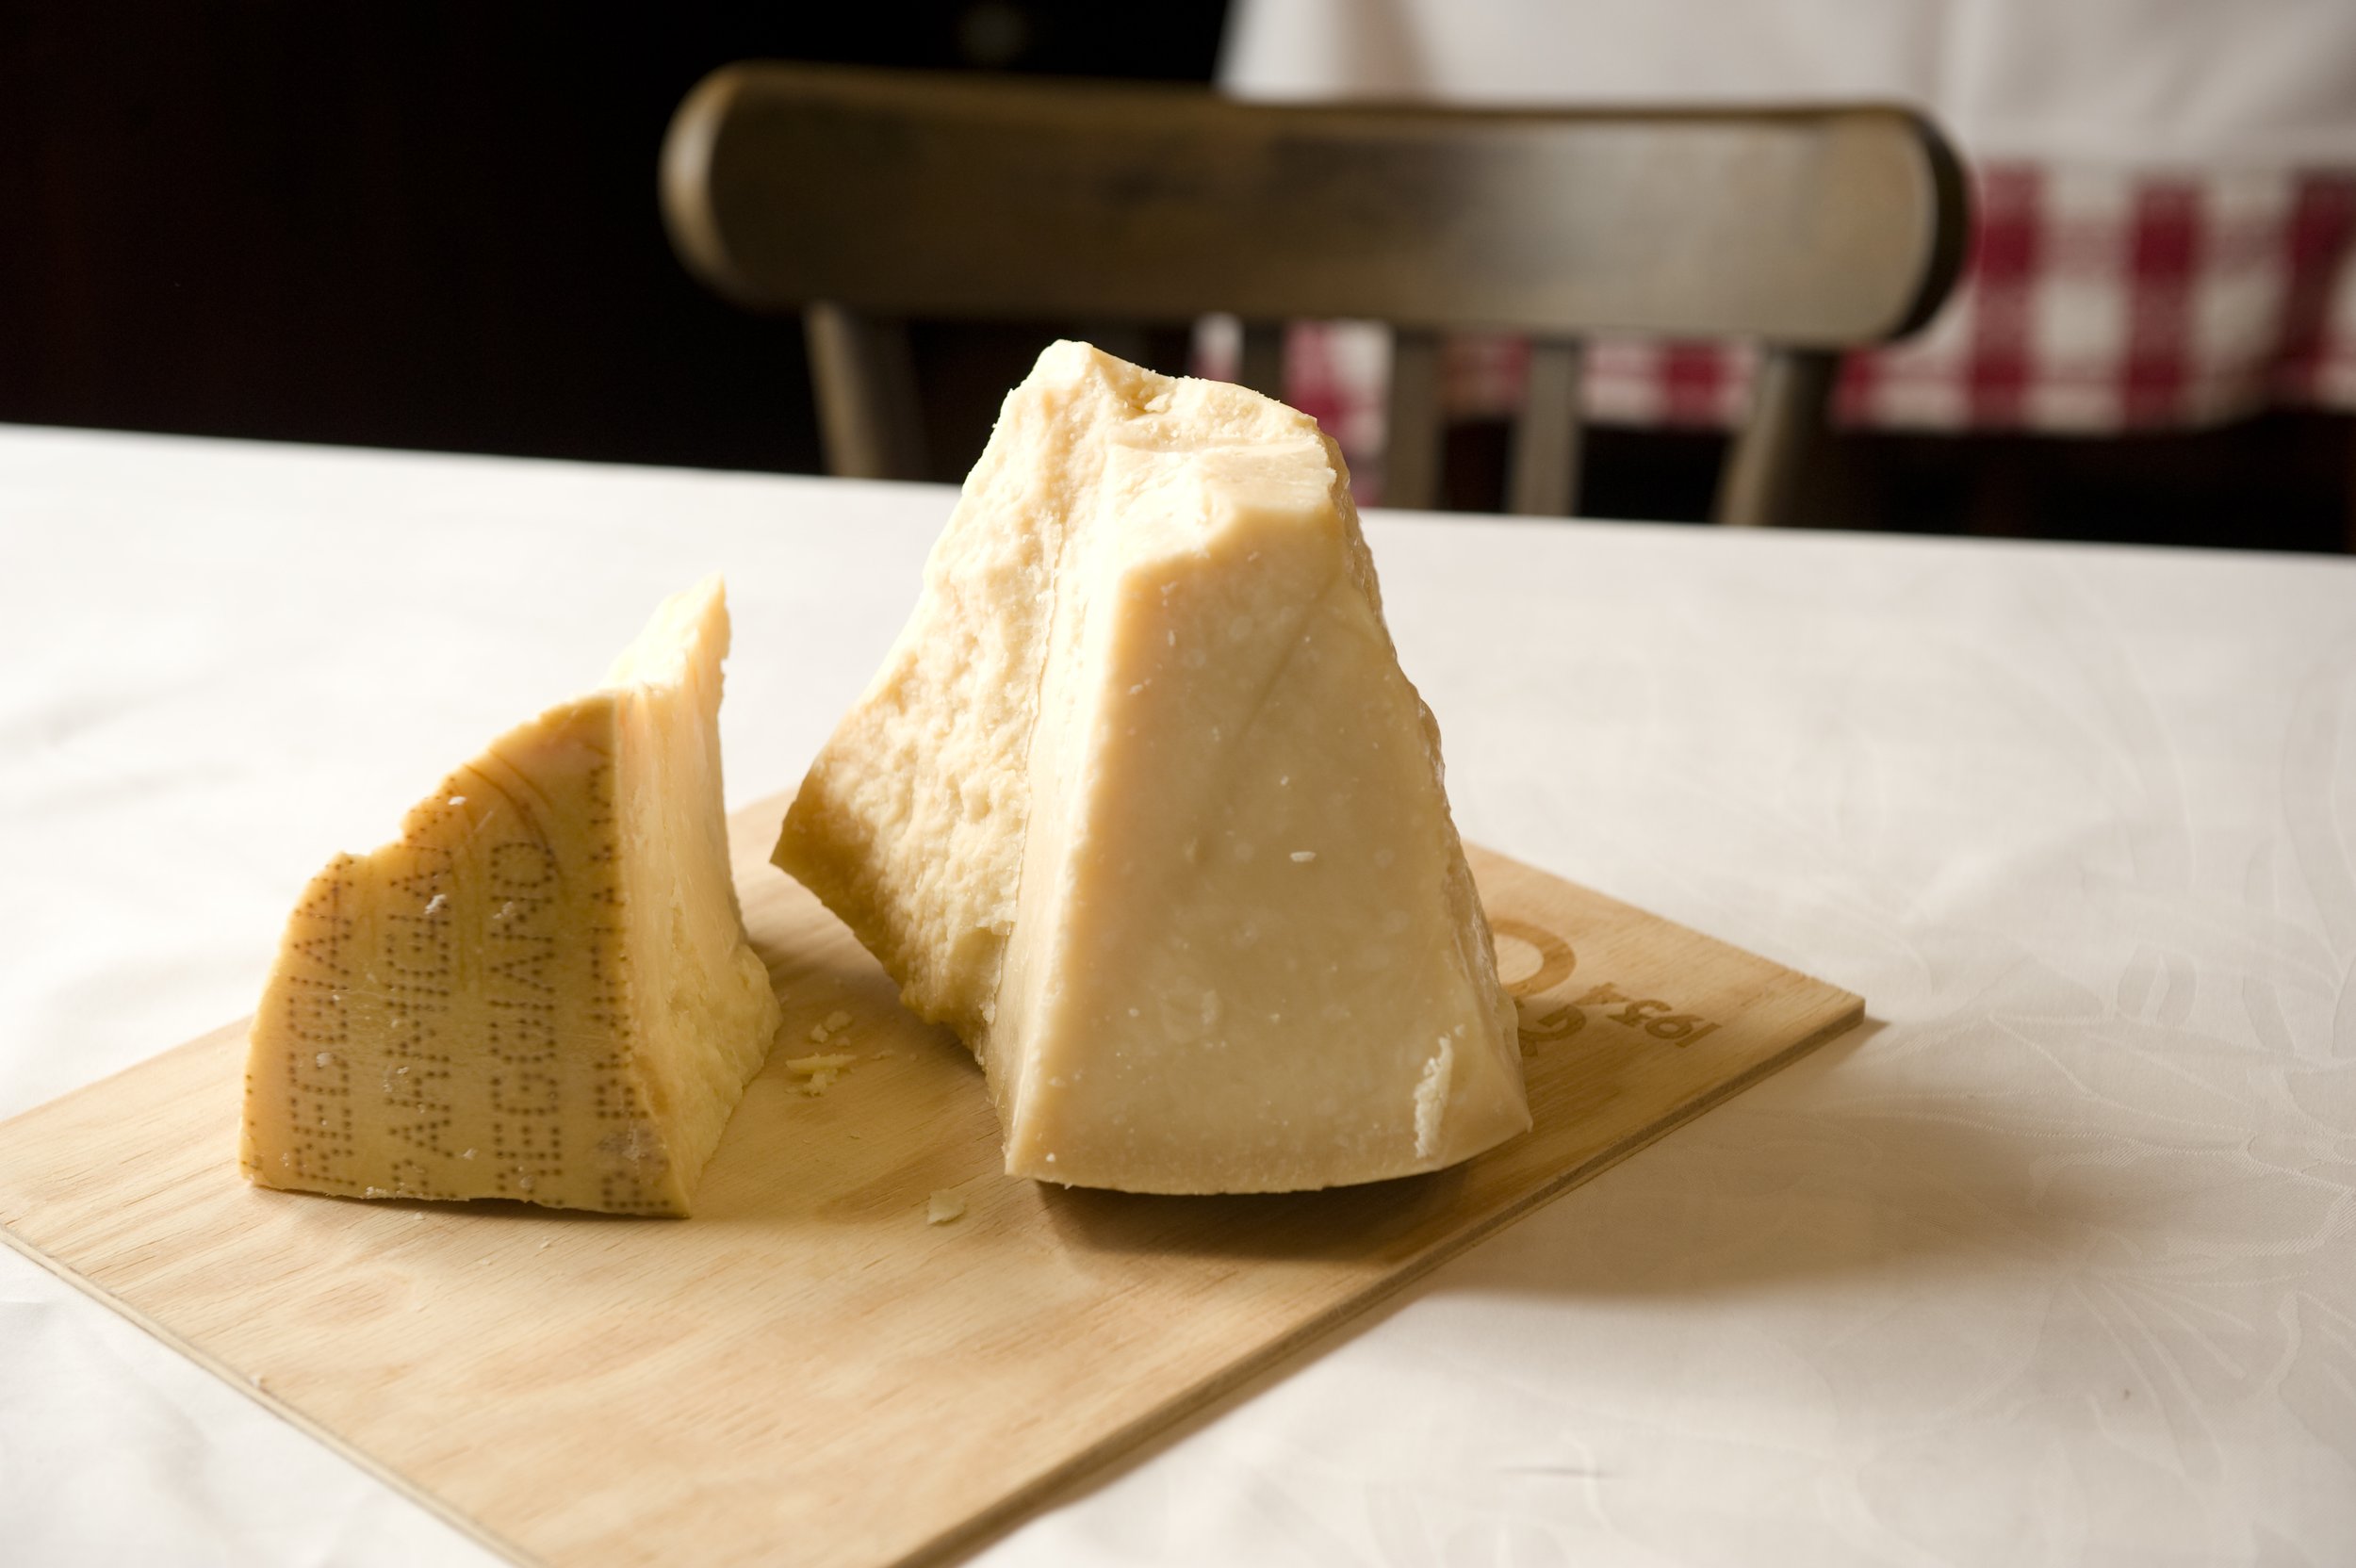 Best Cheese for Lactose Intolerance